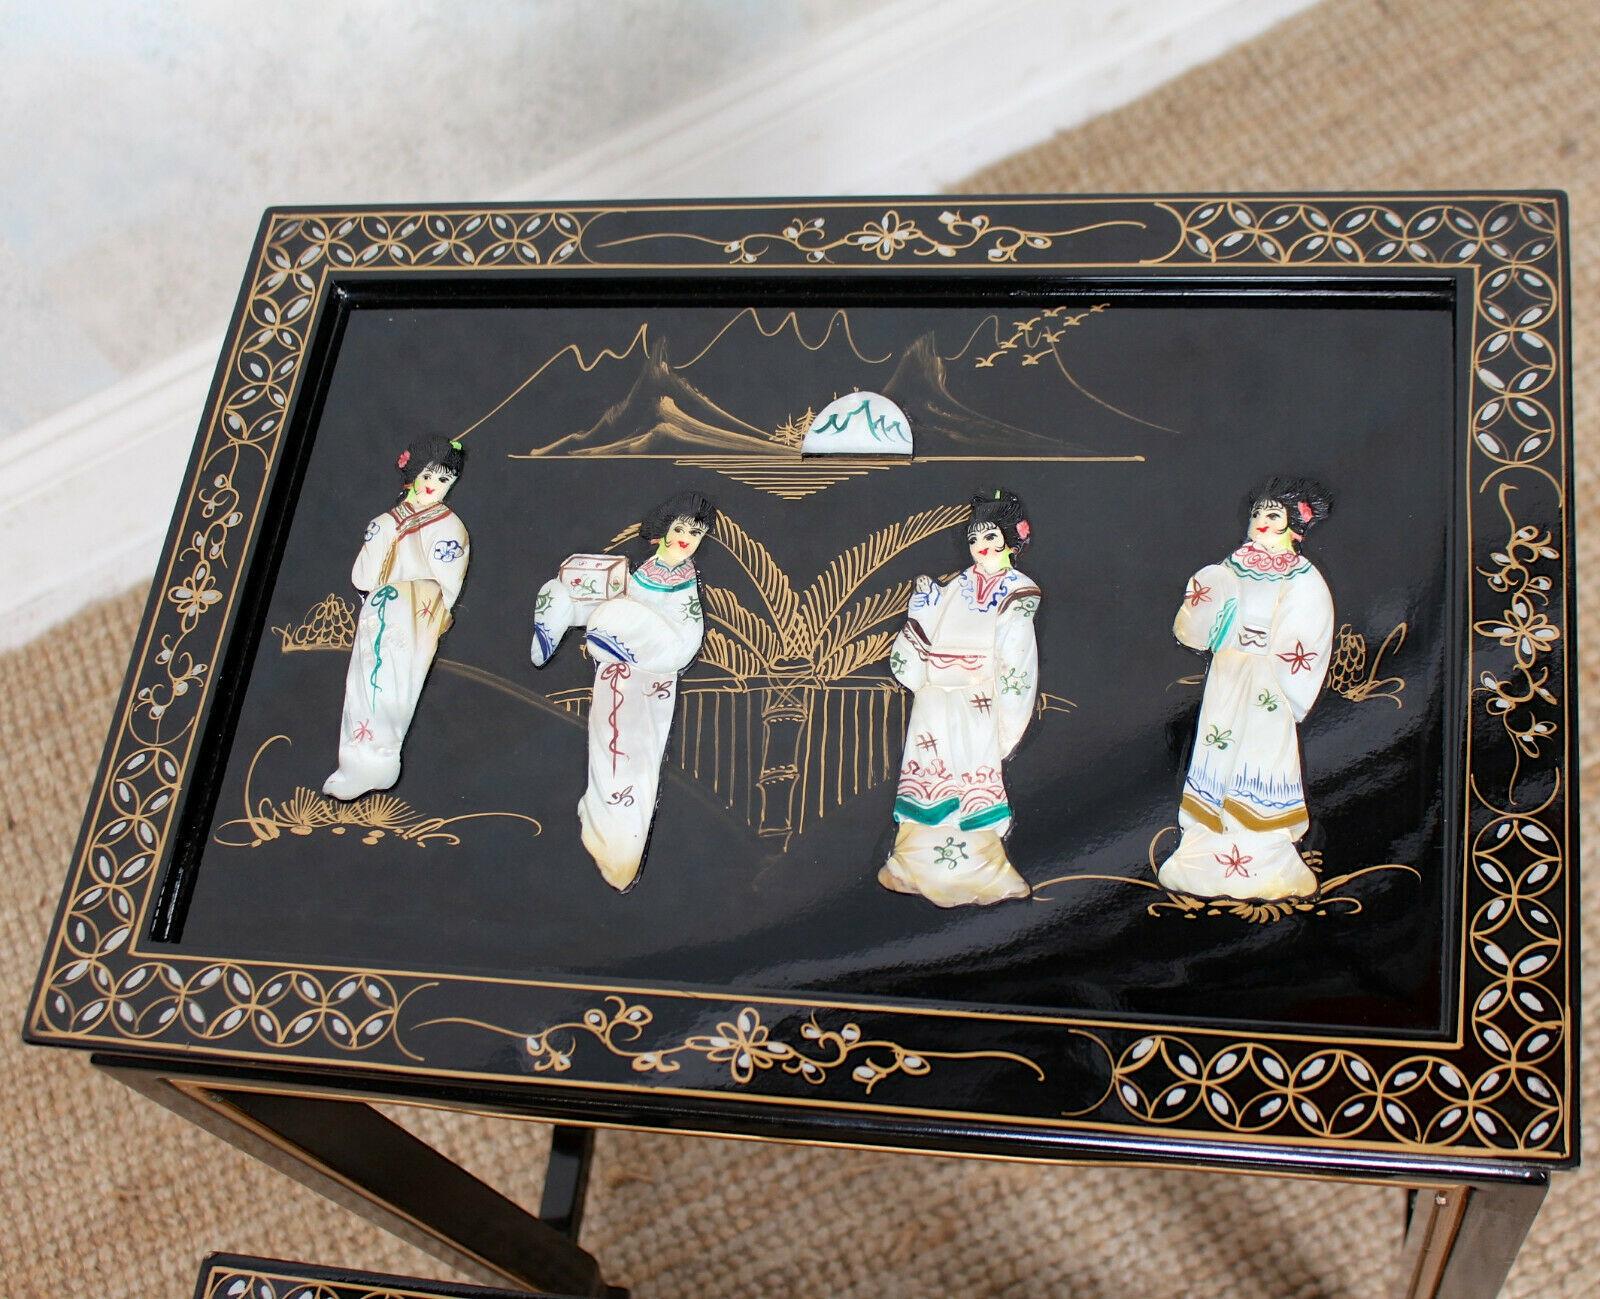 An impressive Oriental nest of three tables.

Ebonised with gilt inlay and lacquered finish chinoiserie and inlaid with gilt borders. Each table top with glass tops enclosed Japanese garden scenes of Geishas.